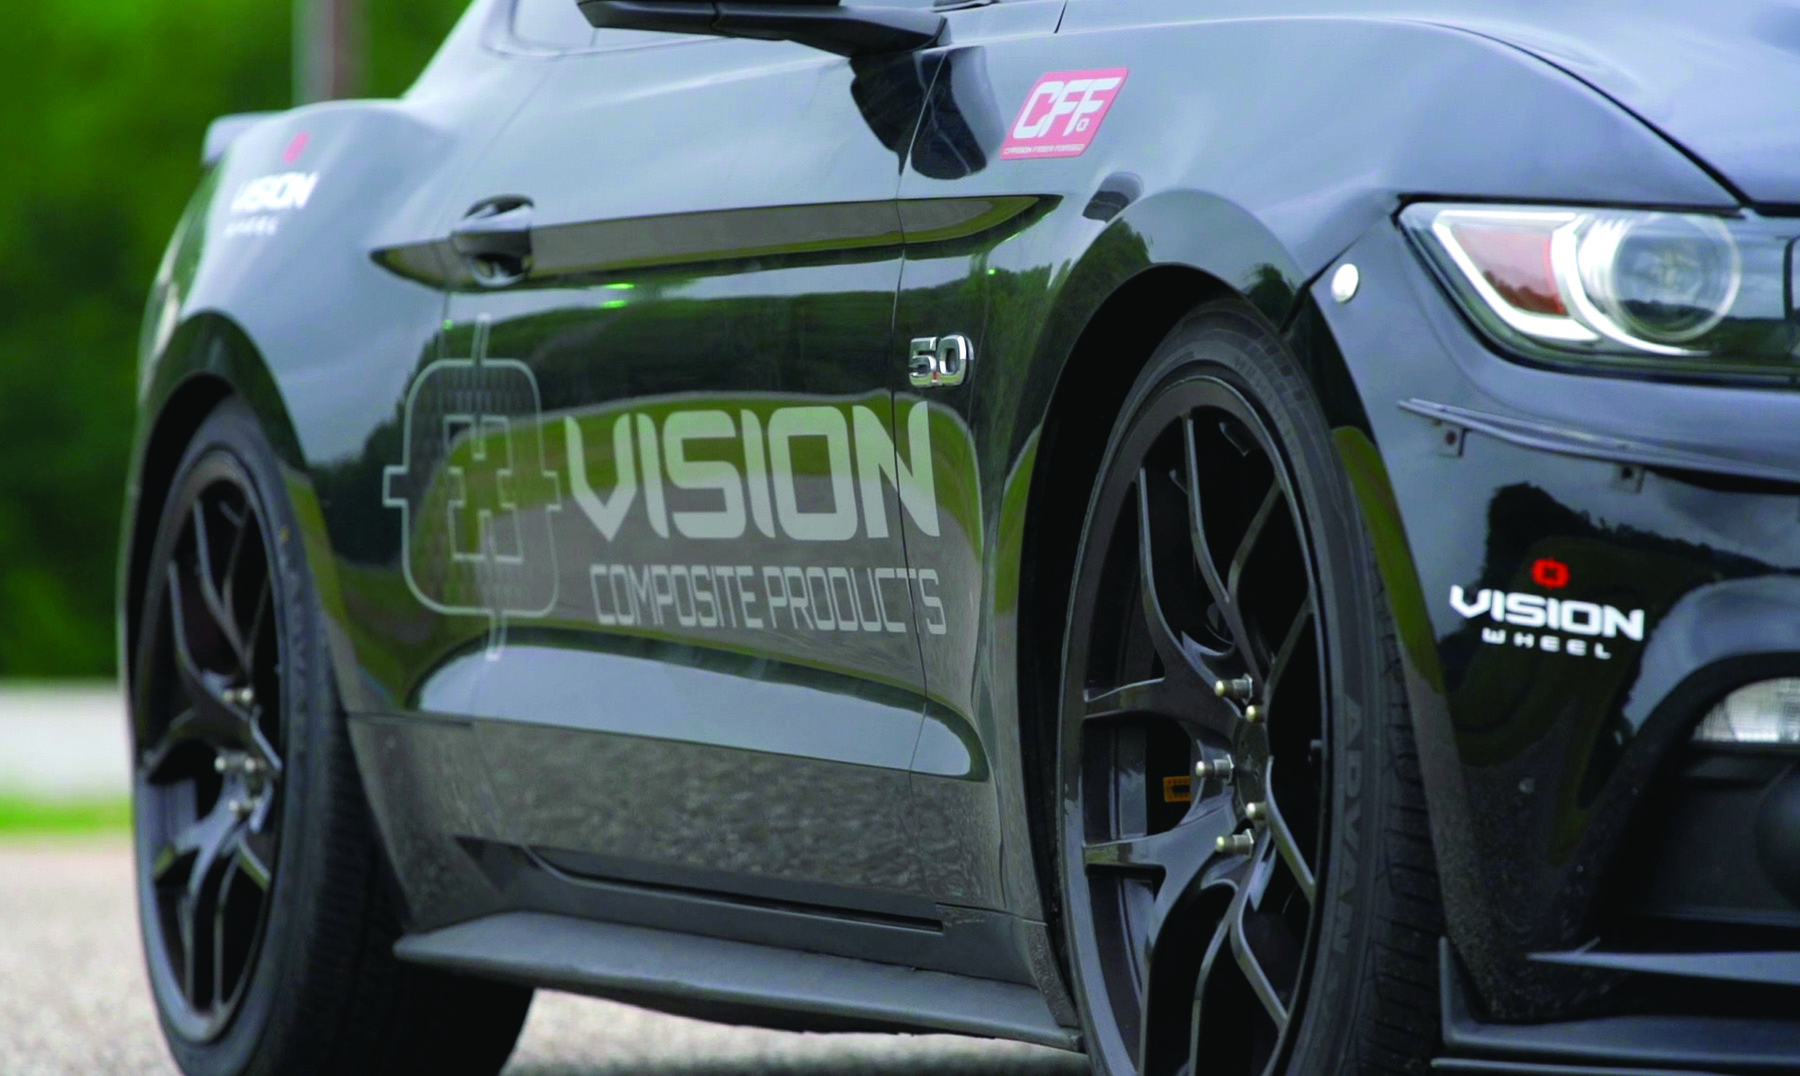 Vision Composite Products Mustang